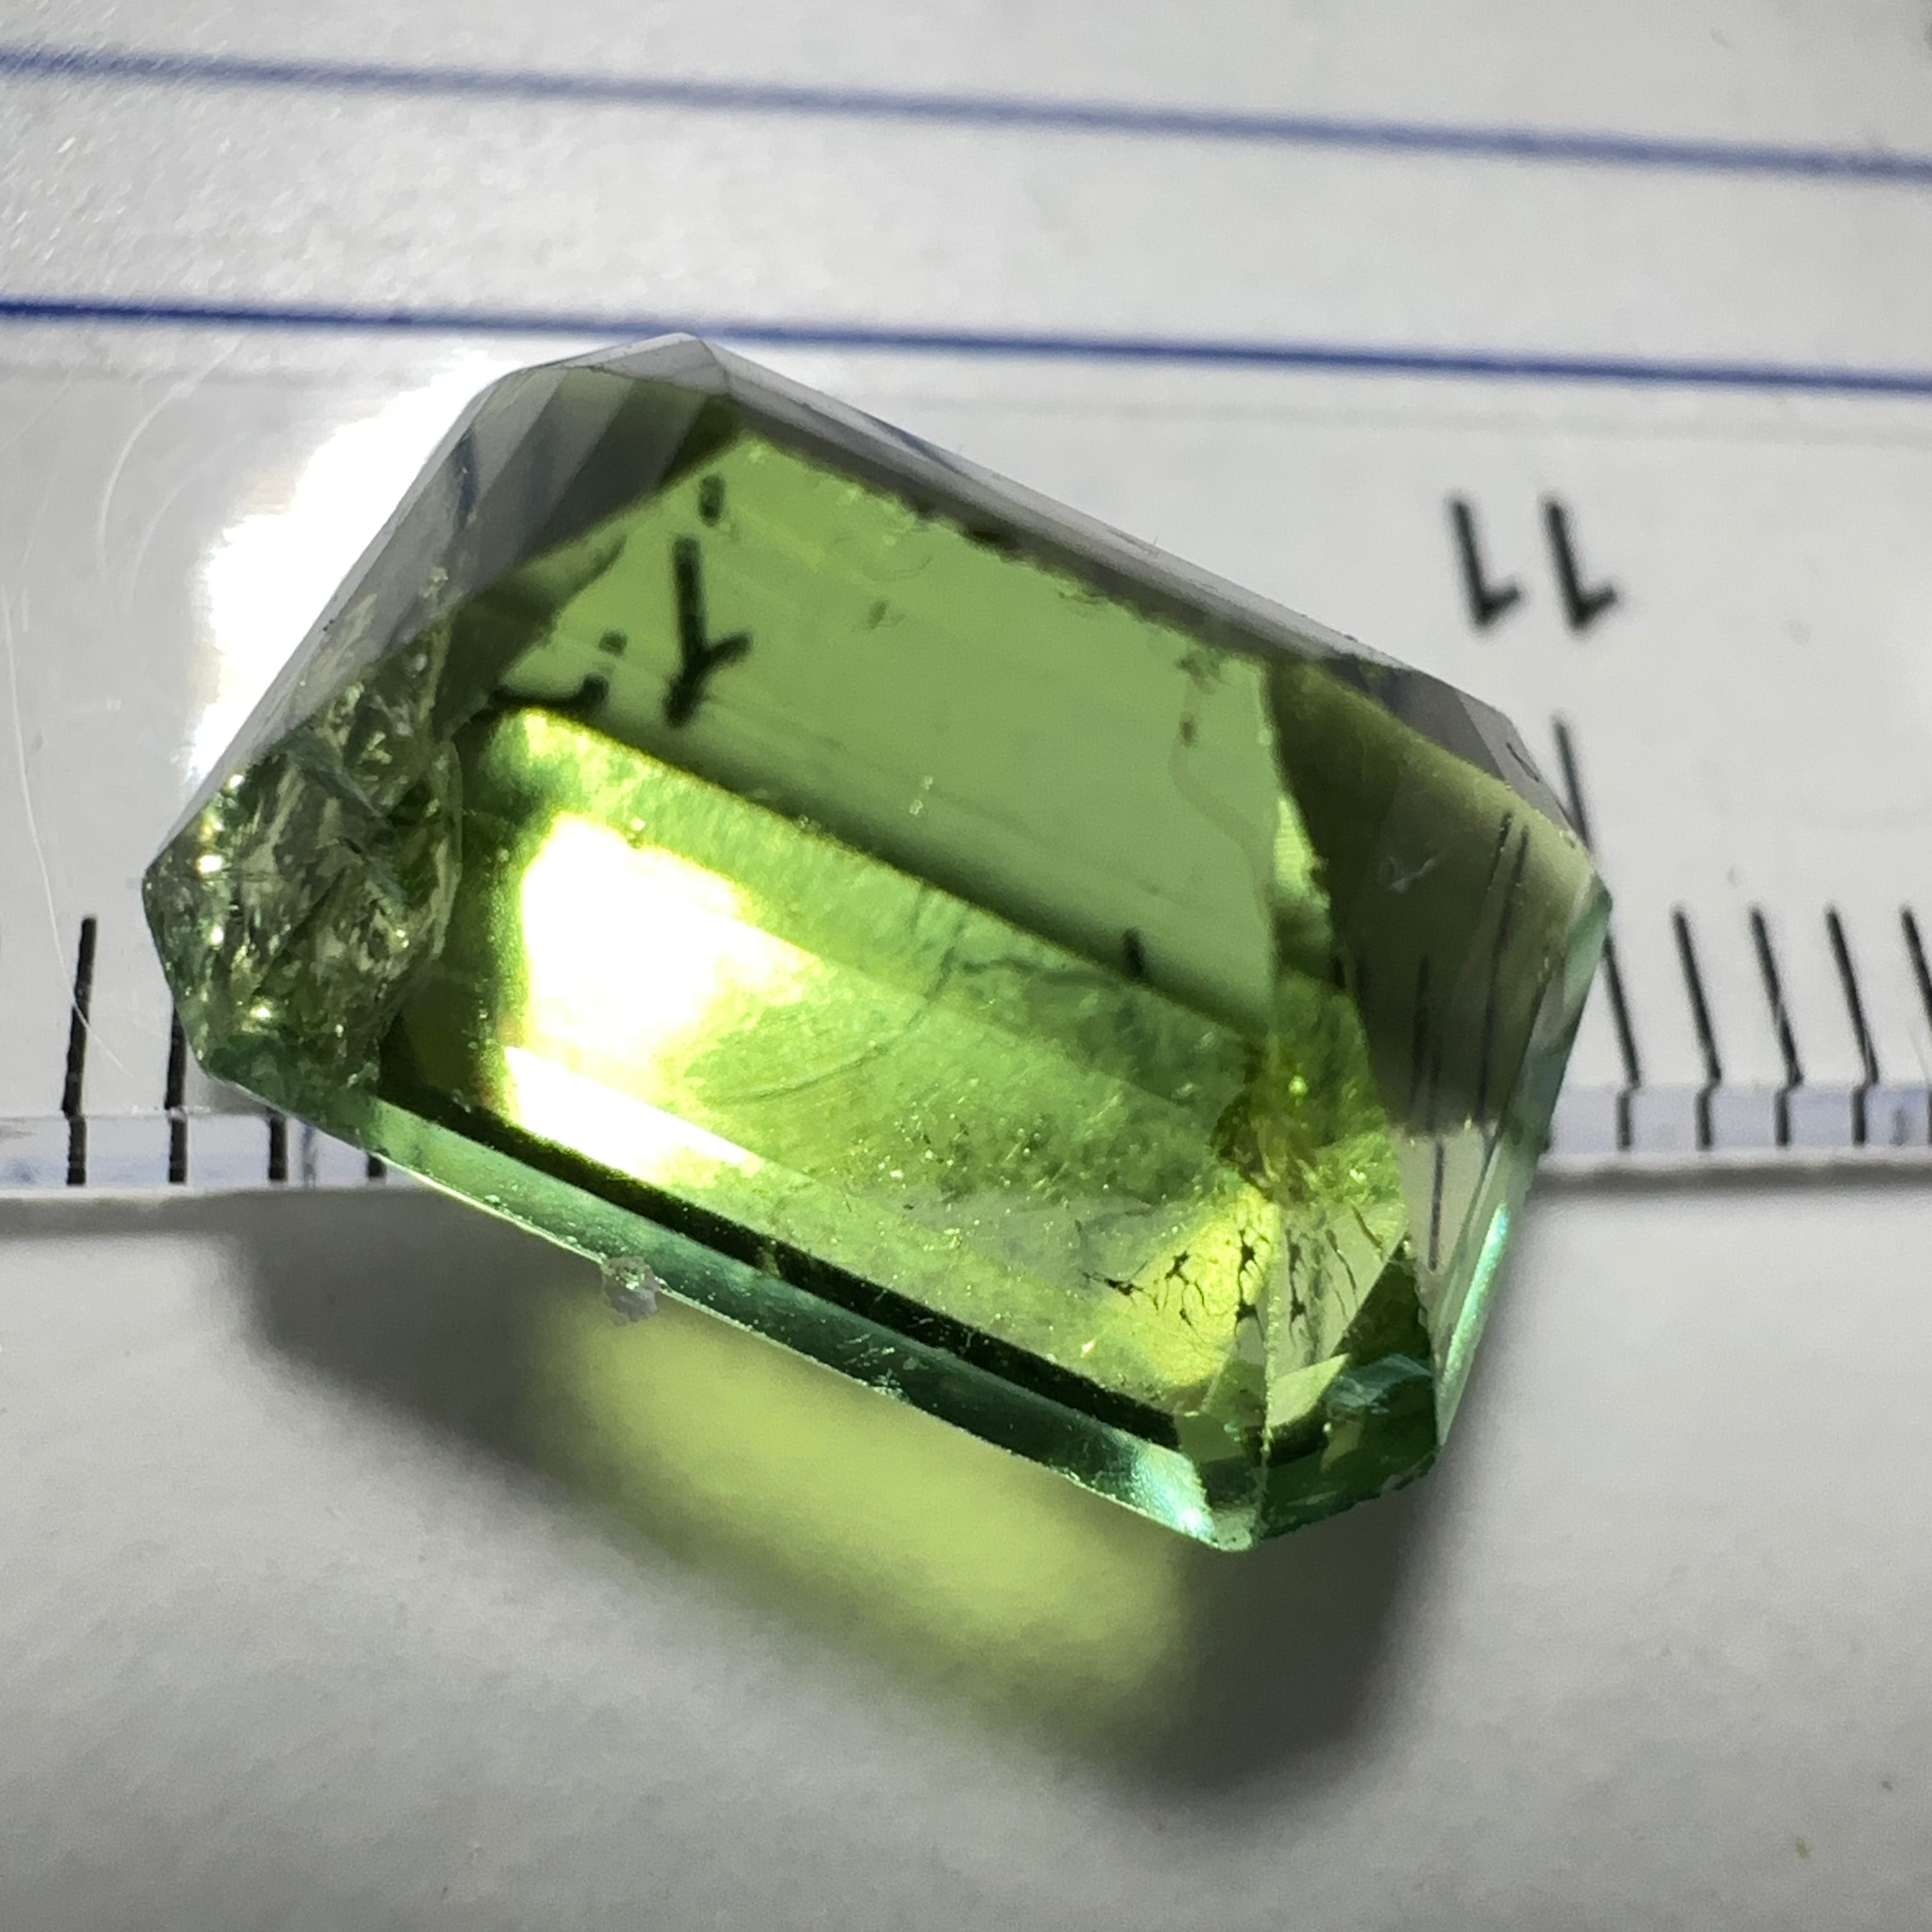 7.18ct Mozambique Tourmaline - Unheated Untreated. Salvaged from an old stock of Mozambique unheated Tourmalines that had been put aside, there is a good portion, needs a recut, treat as a pre-shape for faceting, BUT LOOK AT THAT COLOUR